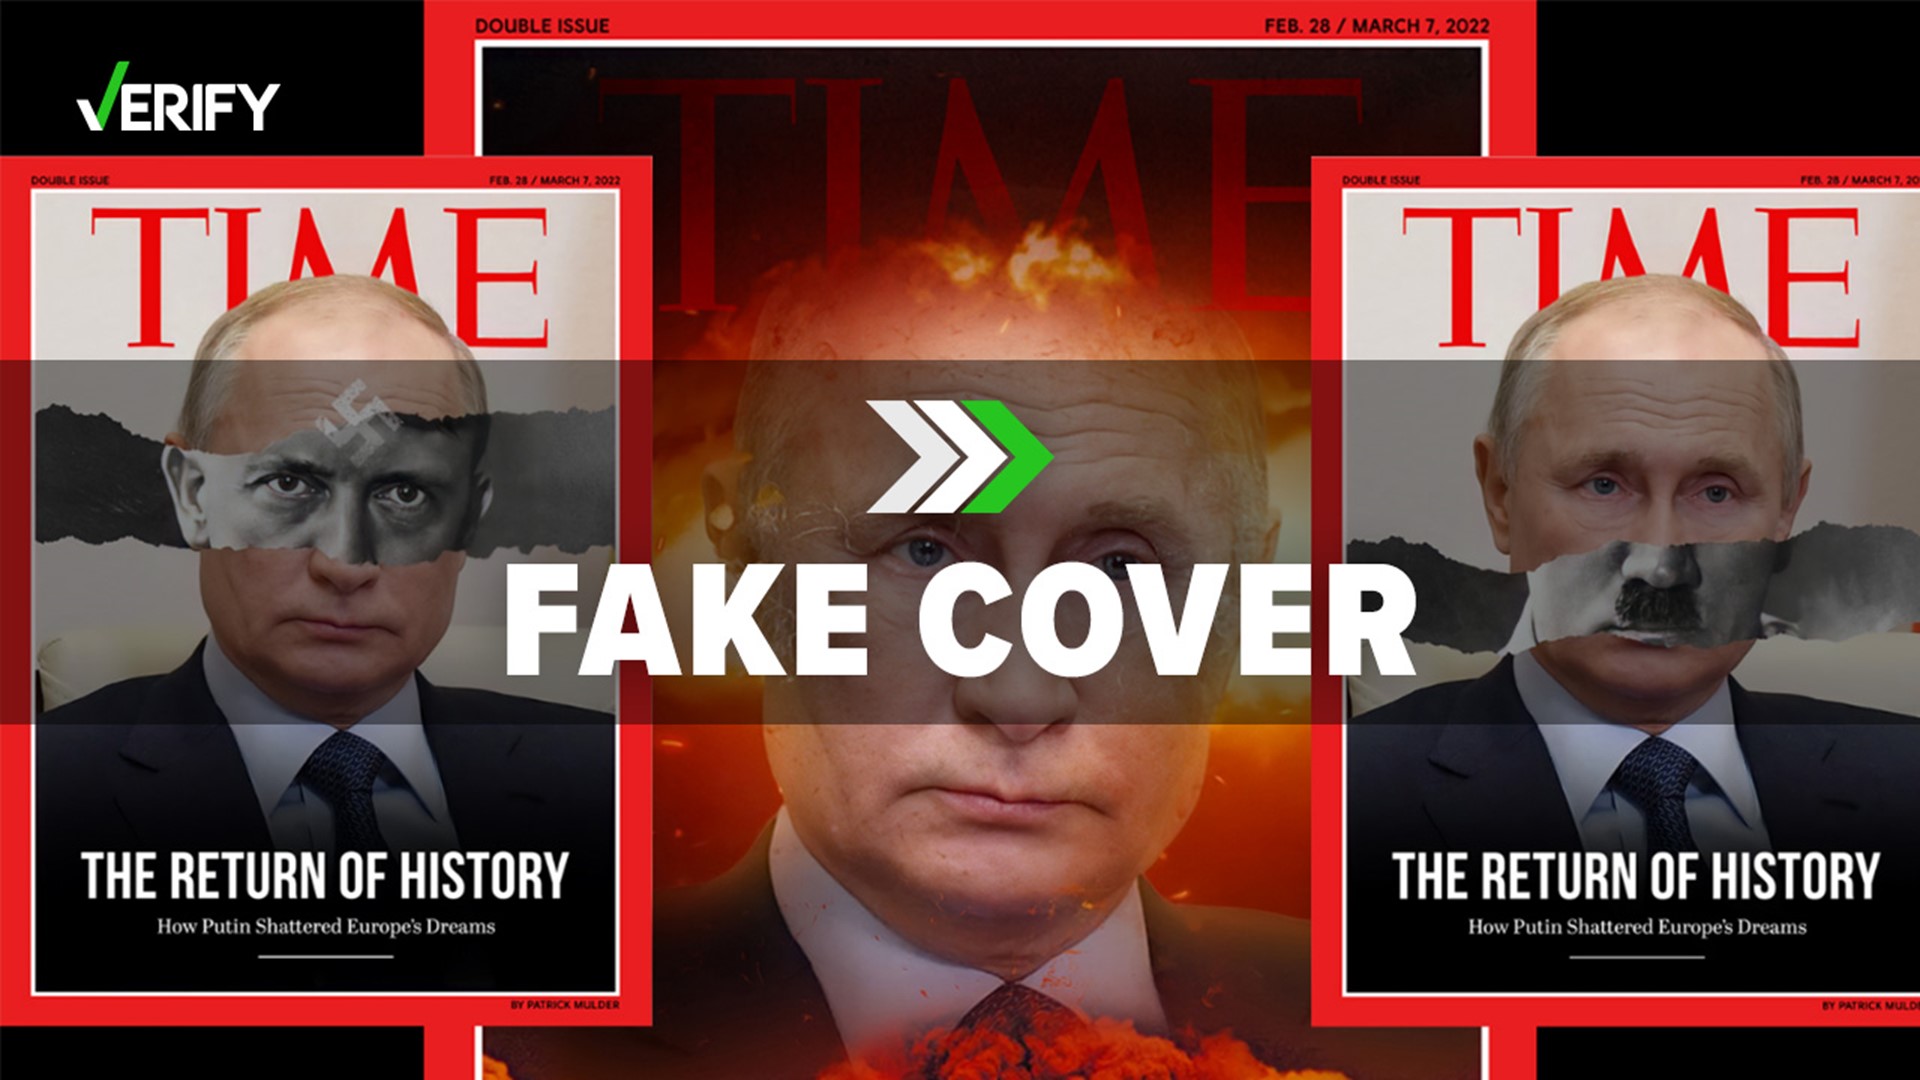 A TIME magazine cover with Vladimir Putin’s face superimposed on Adolf Hitler is not real